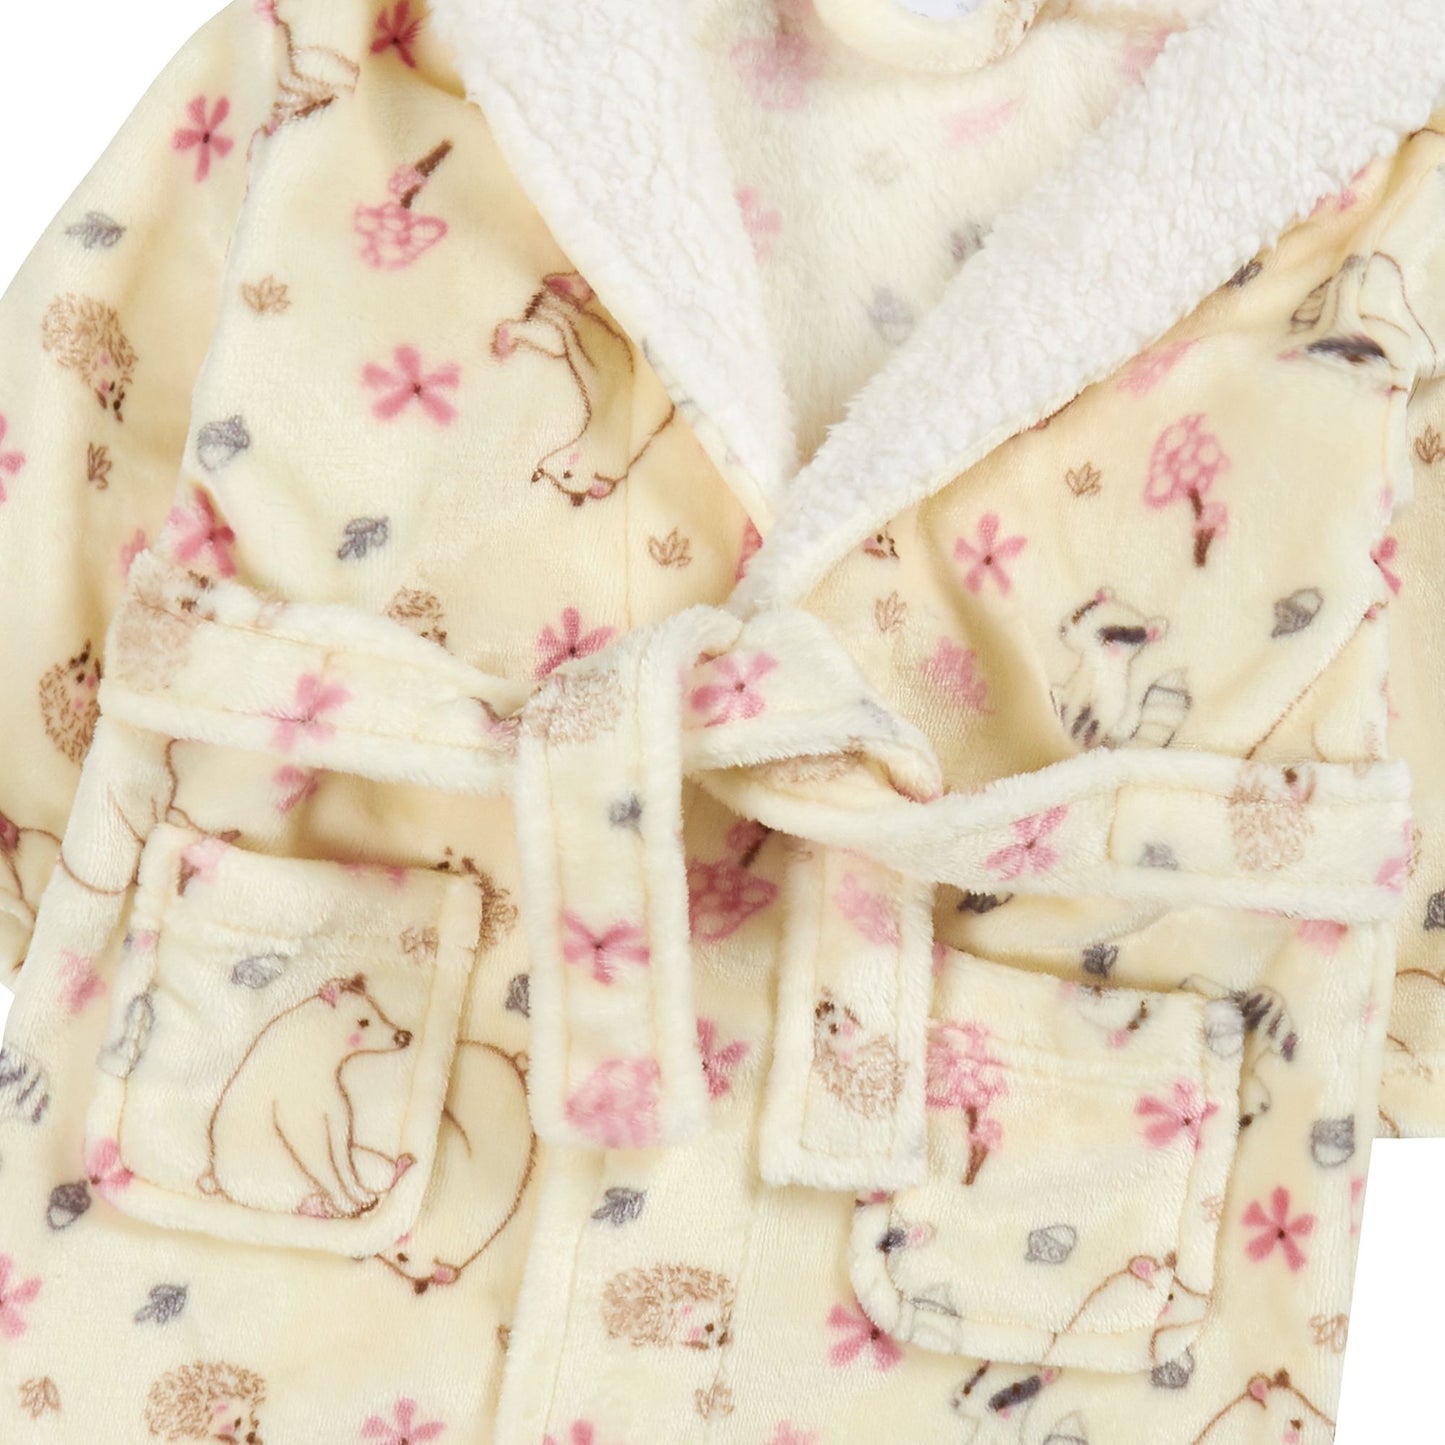 Babies and Childrens Woodland Animal Print Fleece Dressing Gown